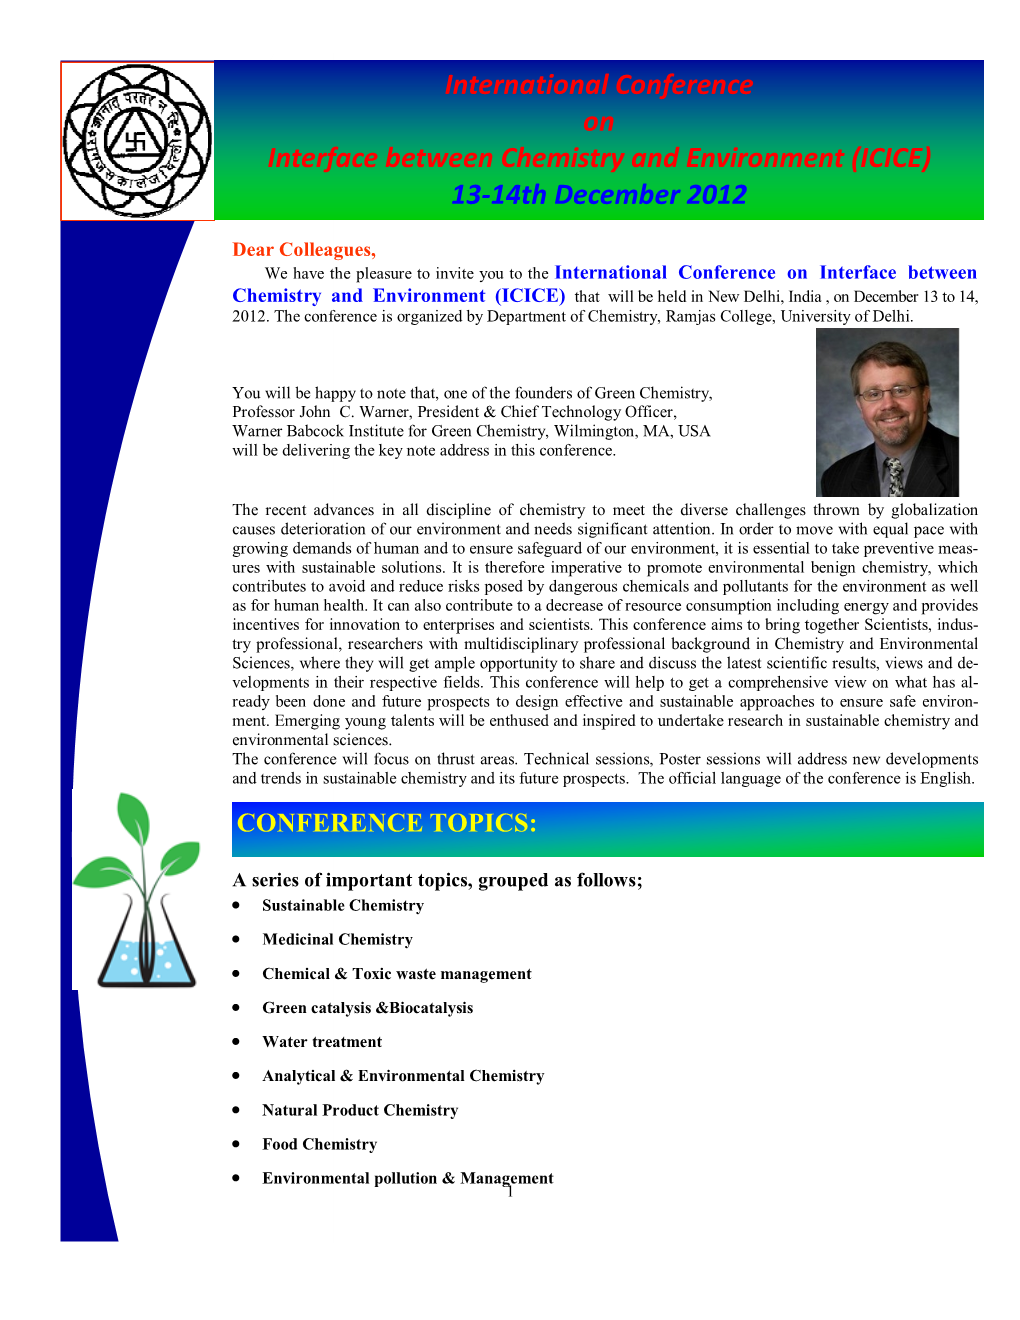 International Conference on Interface Between Chemistry and Environment (ICICE) That Will Be Held in New Delhi, India , on December 13 to 14, 2012